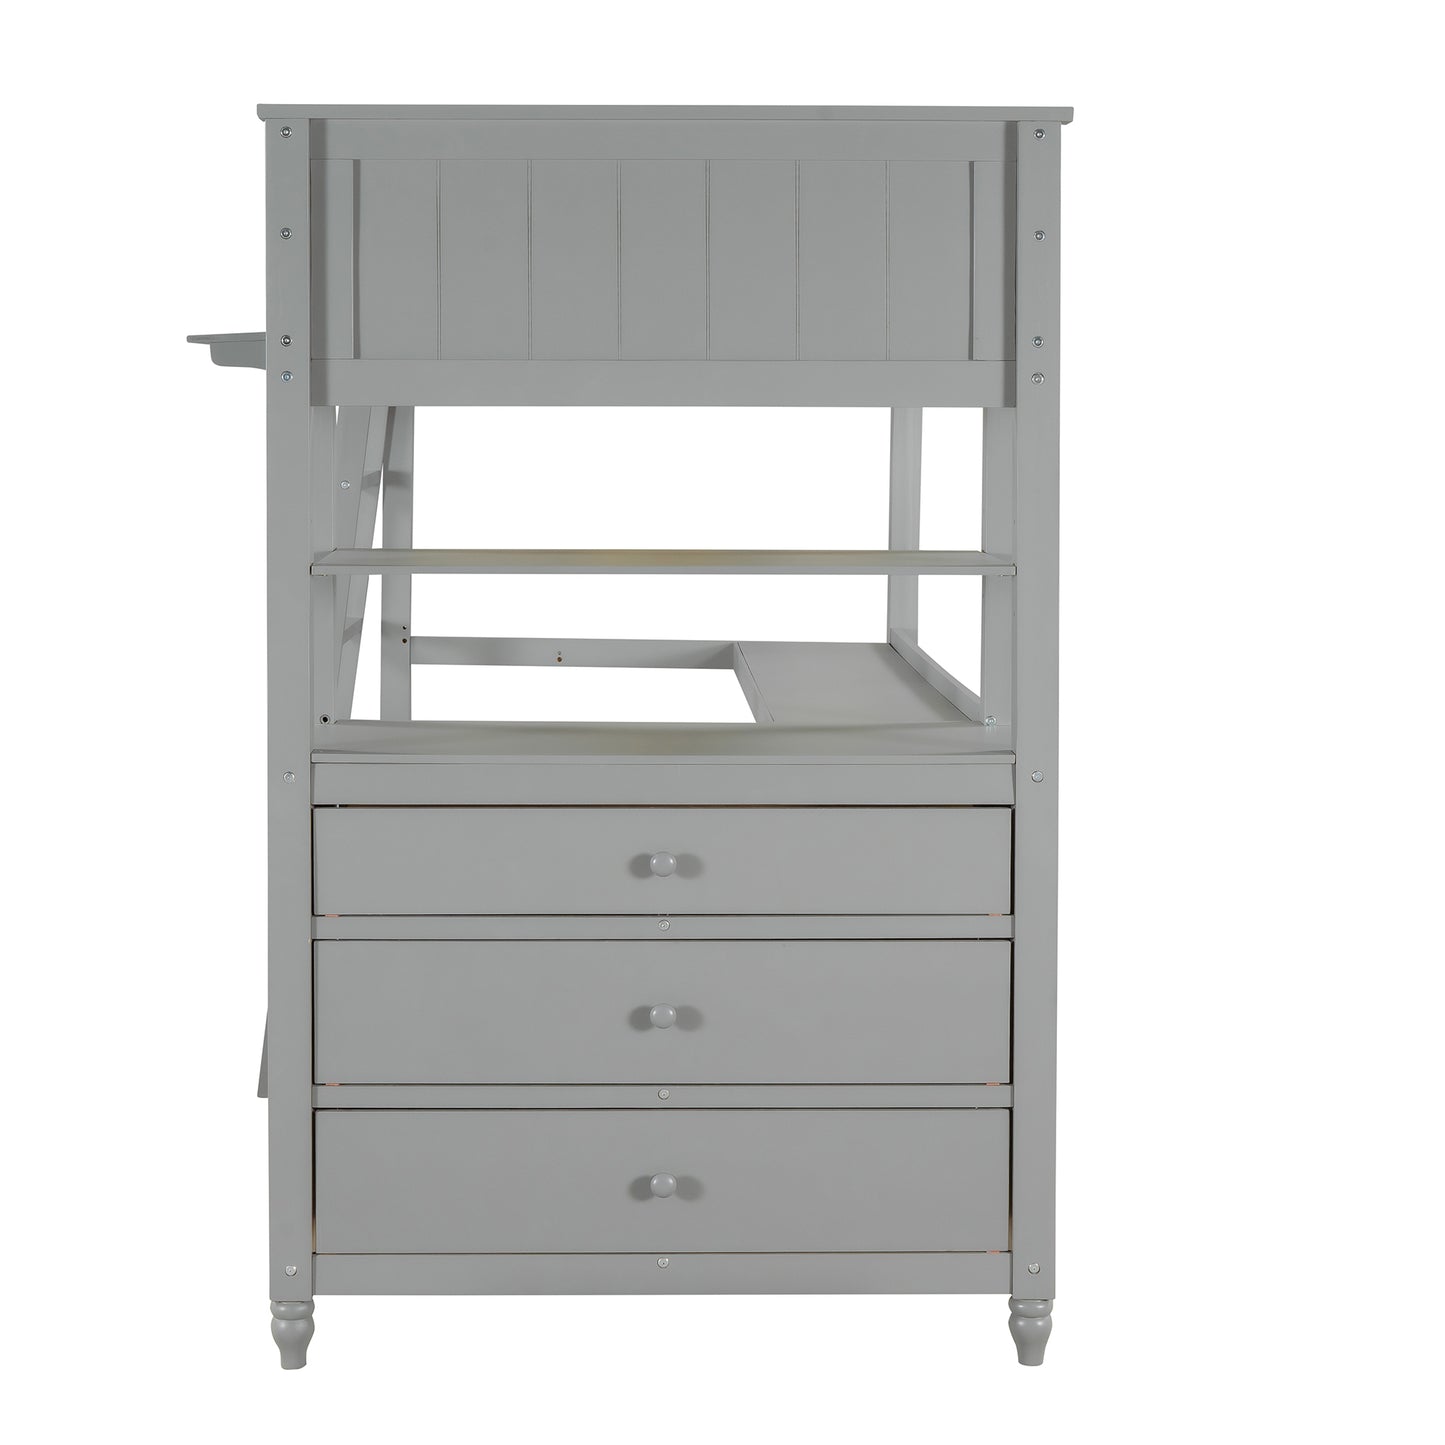 Twin size Loft Bed with Drawers and Desk, Wooden Loft Bed with Shelves - Gray